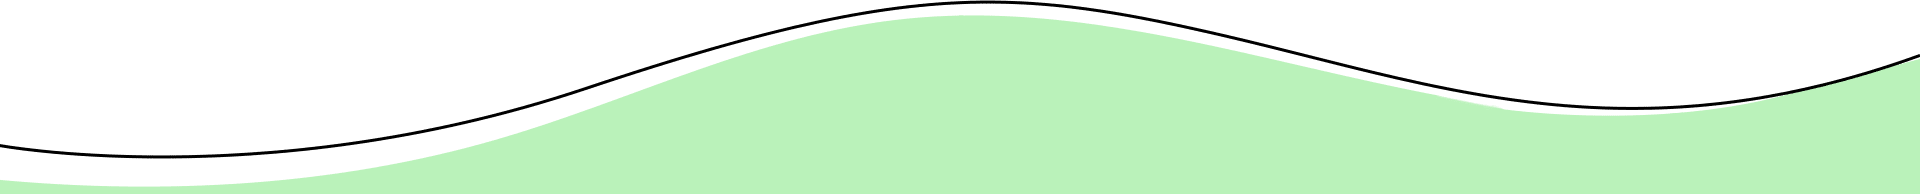 A green background with black lines on it.